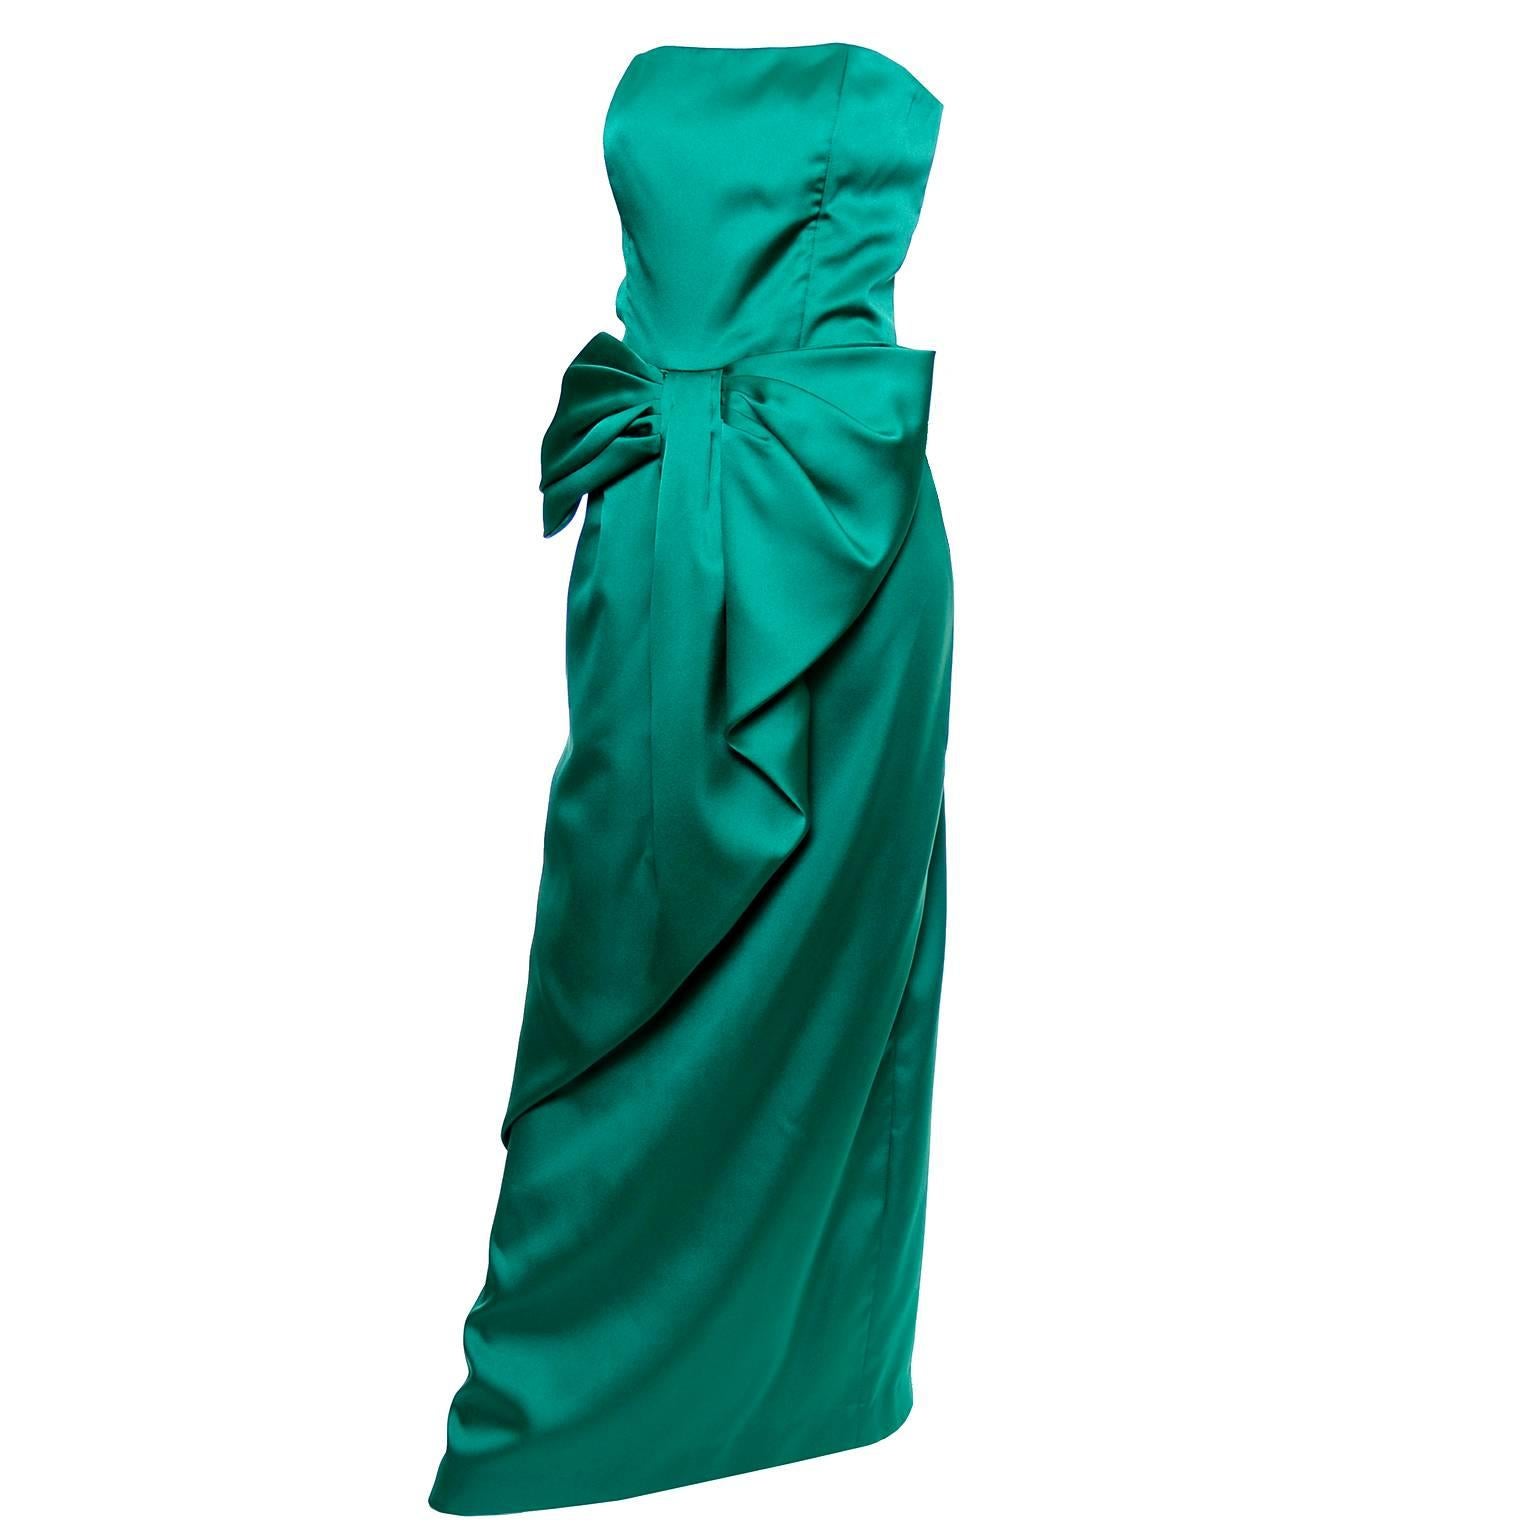 Victor Costa Vintage Dress Green Satin Strapless Evening Gown Dress w/ Bow